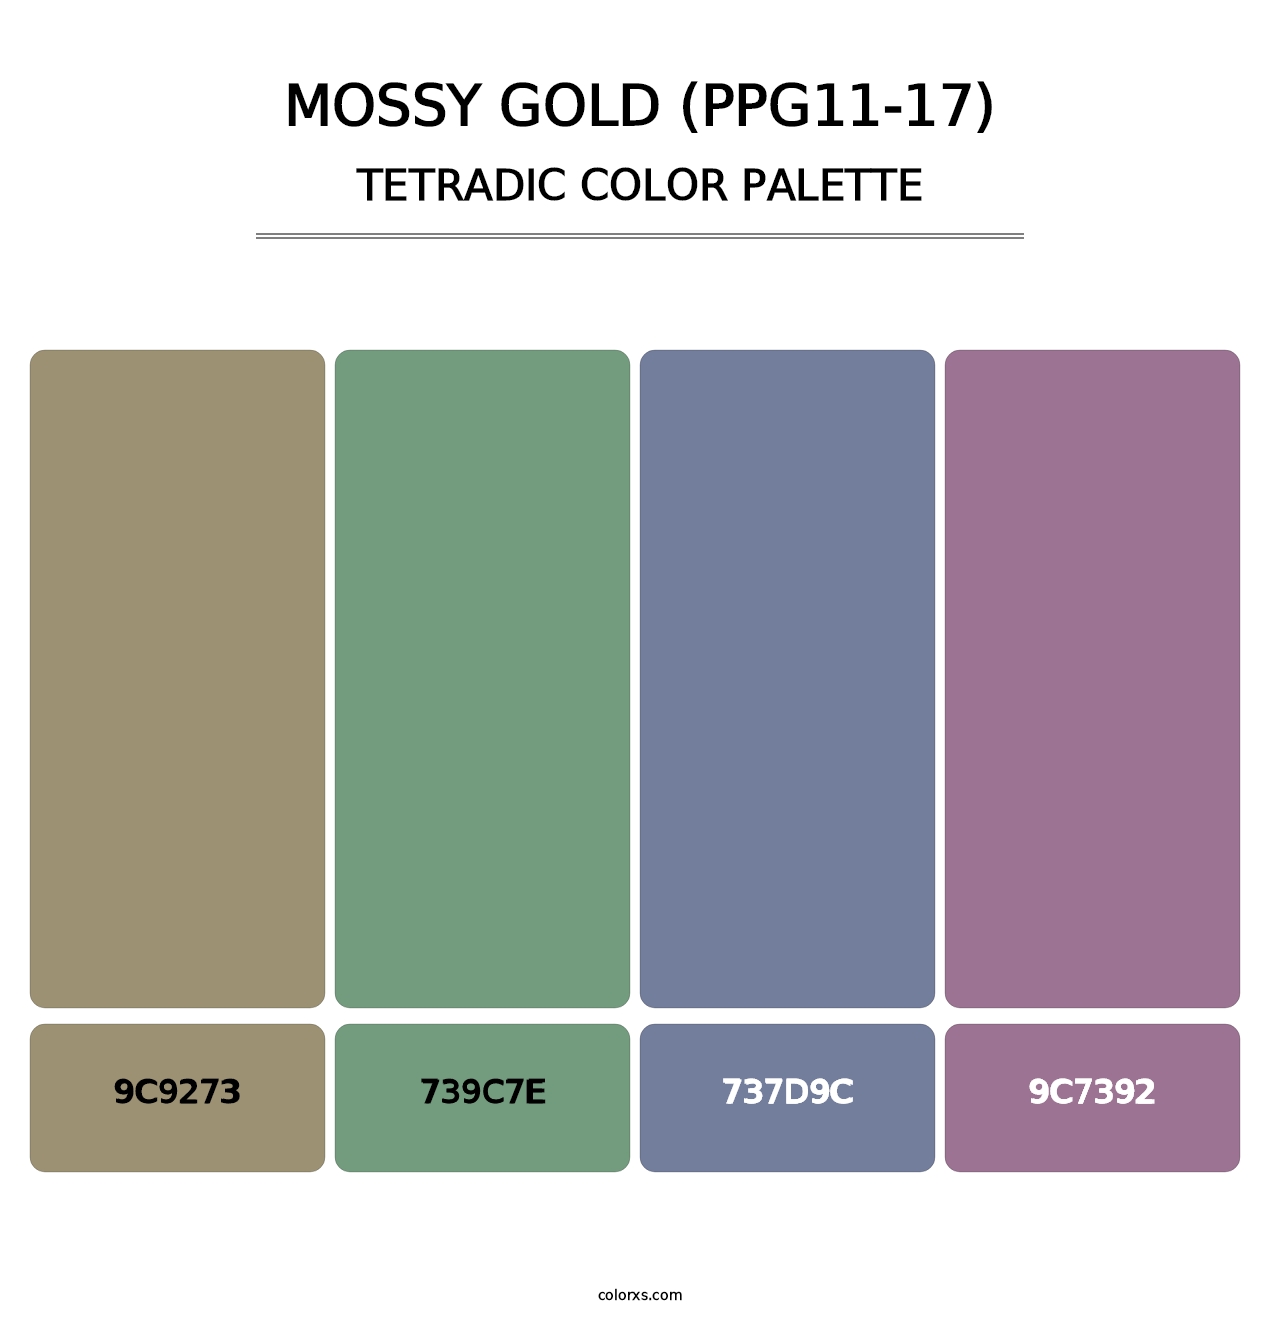 Mossy Gold (PPG11-17) - Tetradic Color Palette